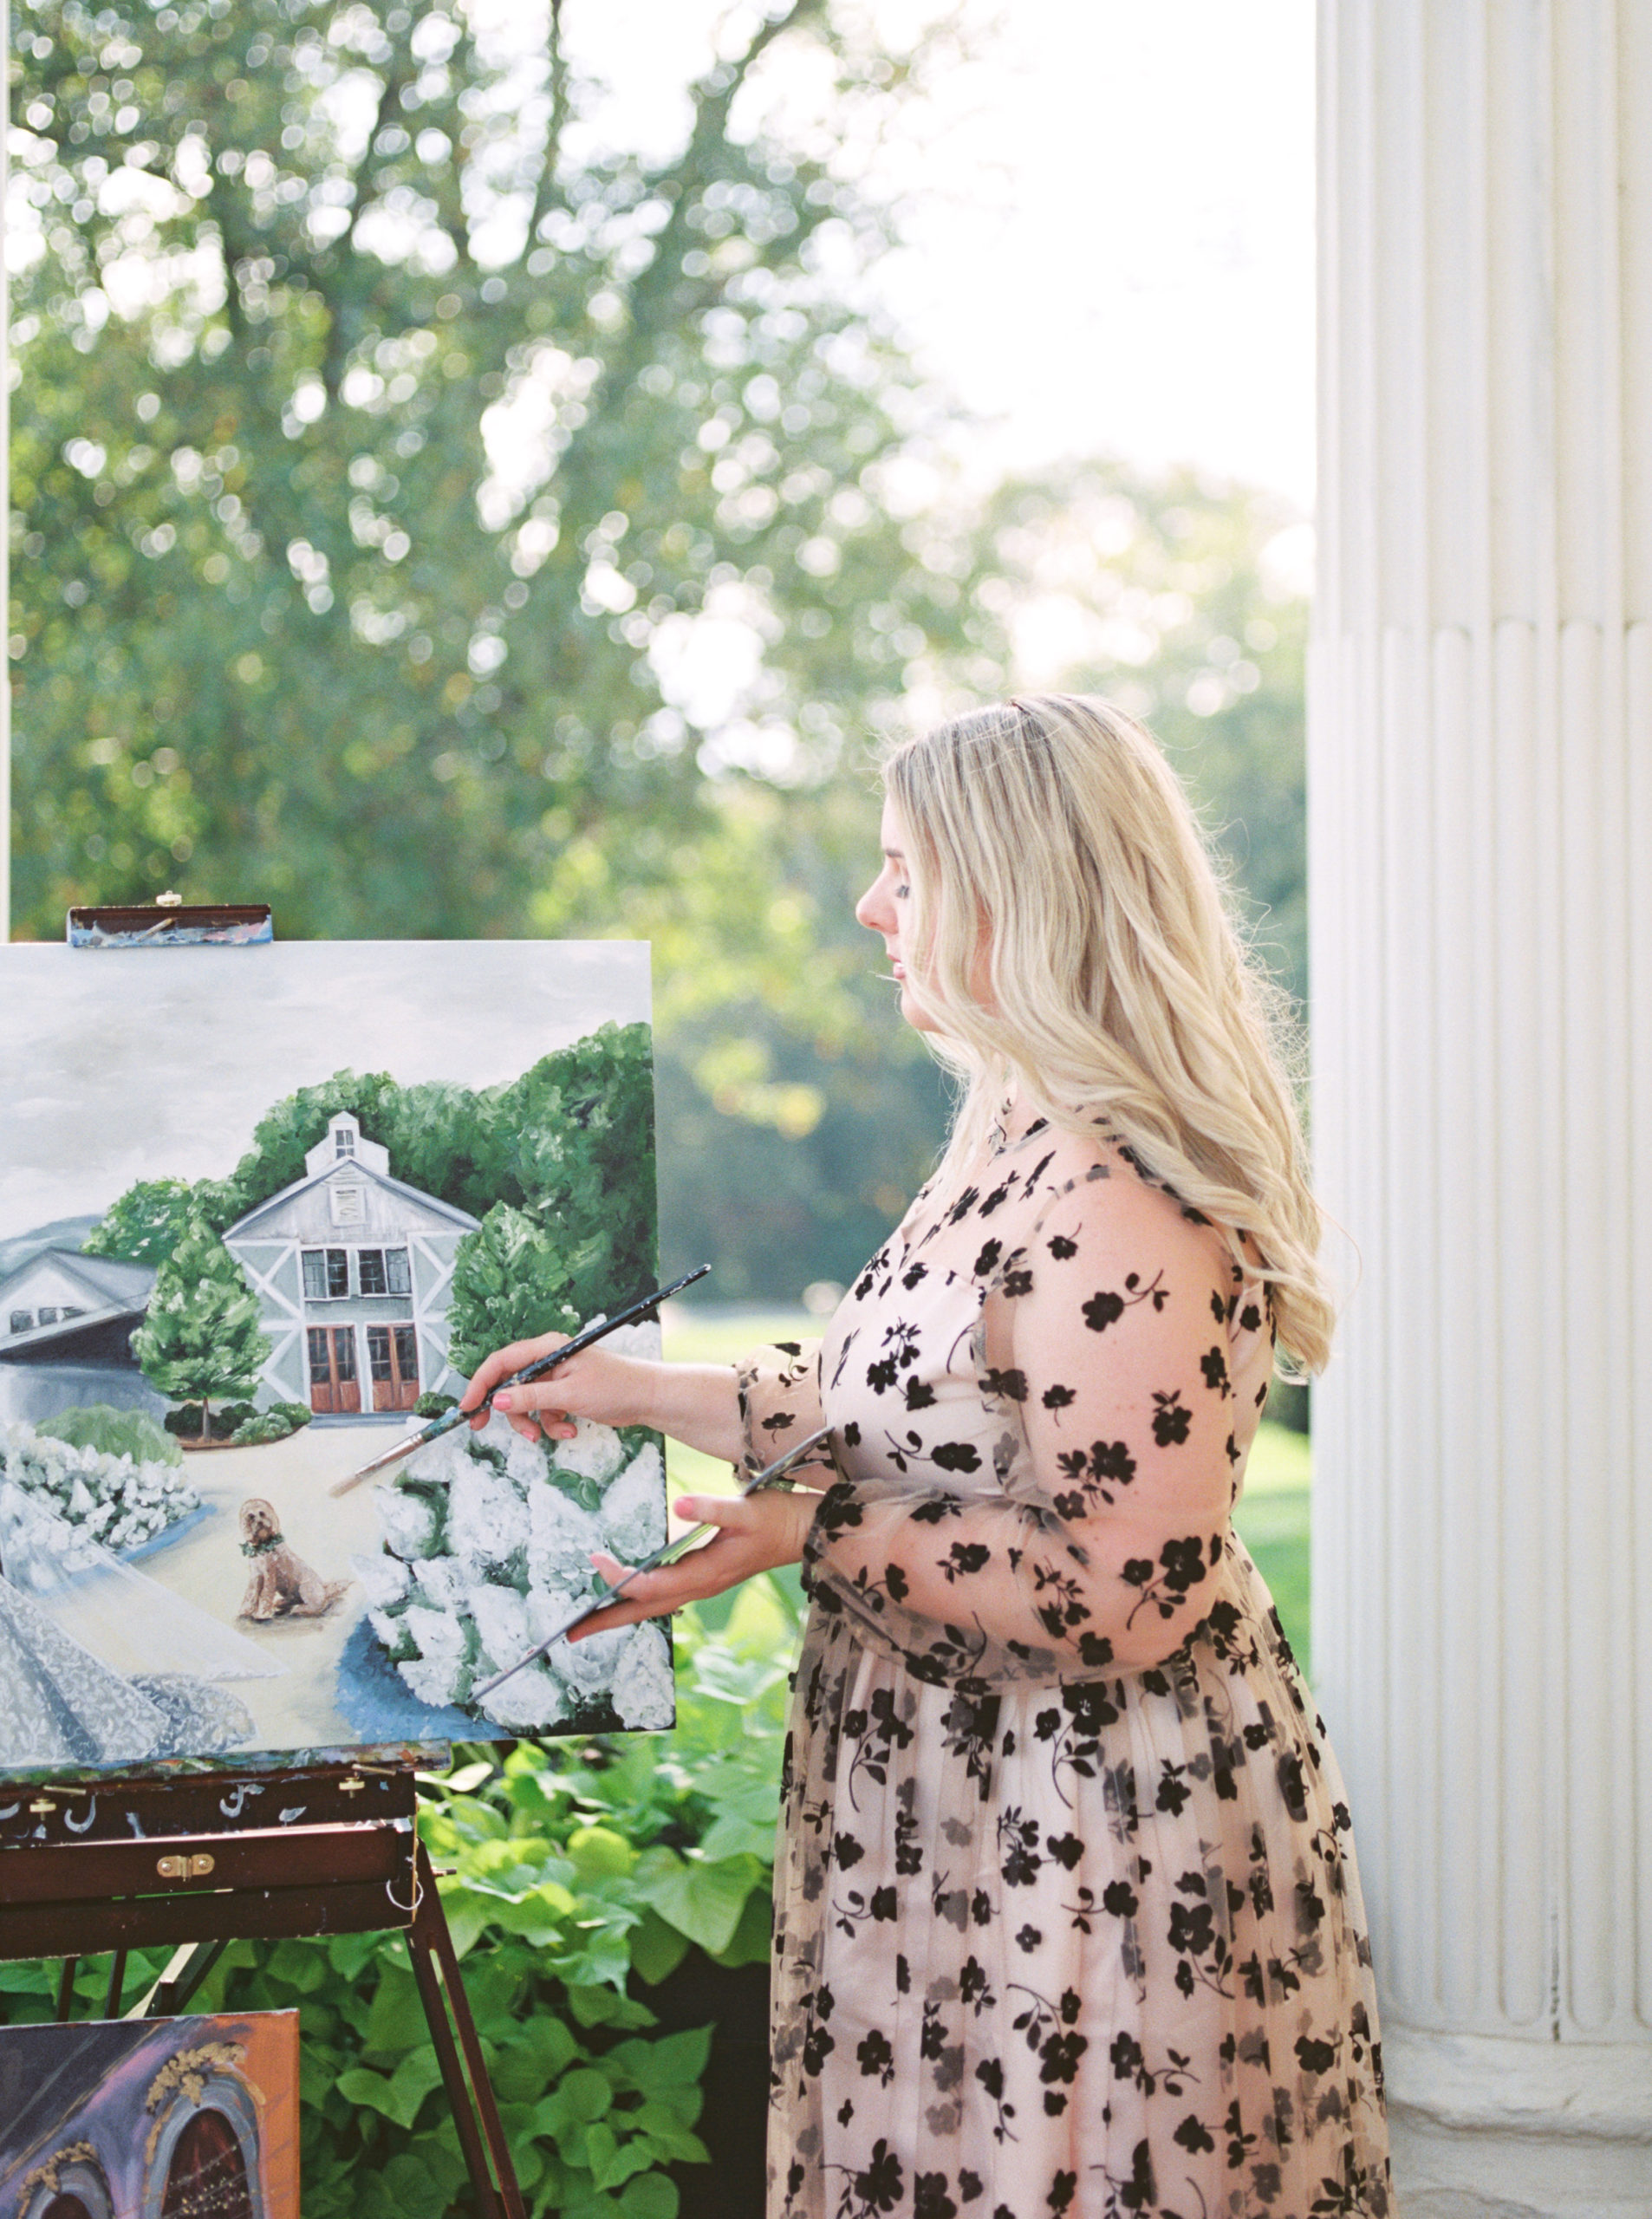 Live wedding painter By Brittany Branson works on a painting in Leesburg, Virginia. She wears a pink dress with black lace overlay.